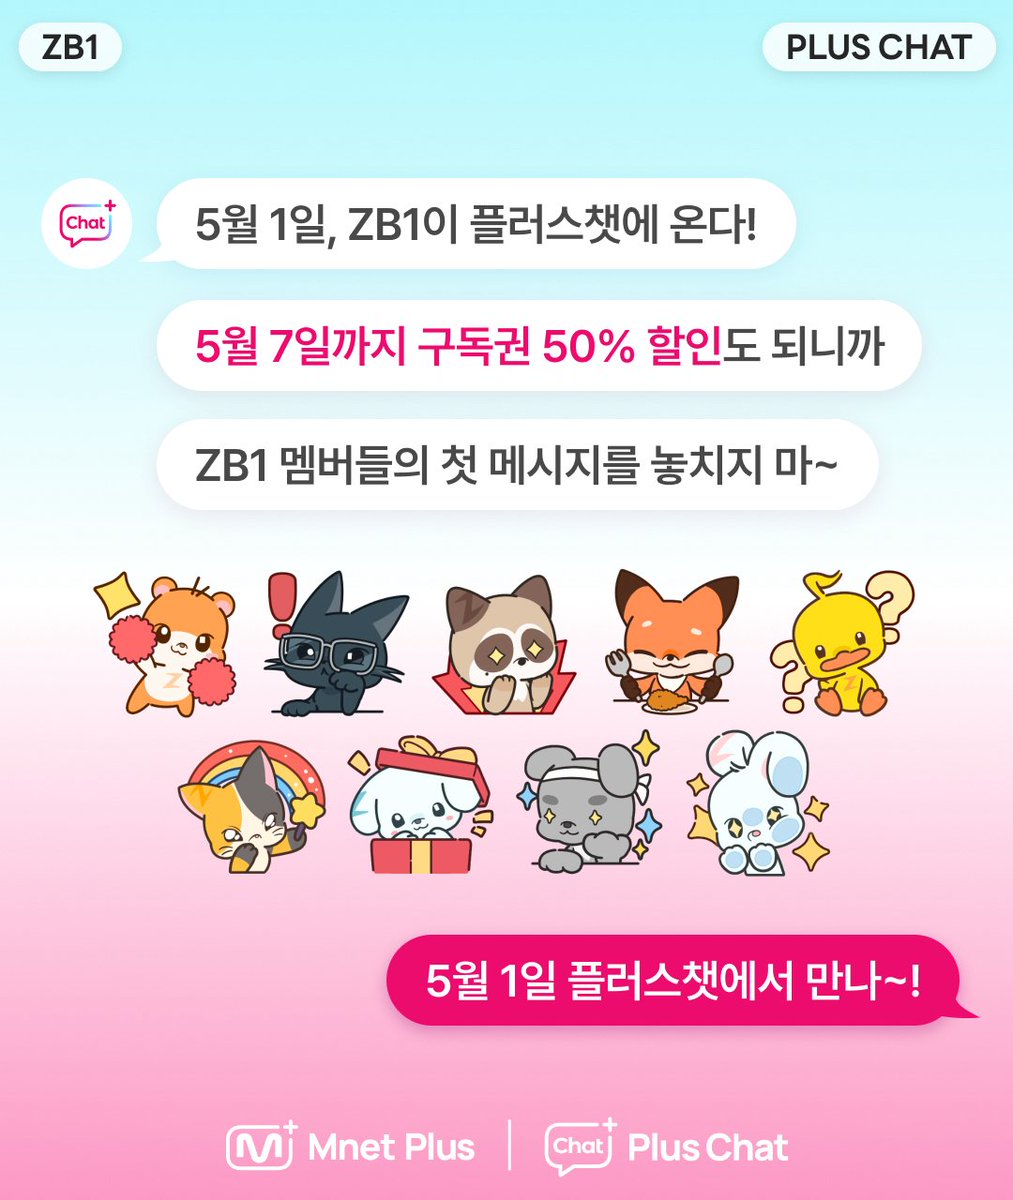 [#PlusChat] #ZB1 Chat 구독권 할인 이벤트 🎉 ZB1 Chat 오픈 기념, 구독권 첫 달 50% 할인! 5월 1일 ZB1 Chat에서 만나보세요! 💙 To celebrate the opening, enjoy 50% off your first month's subscription! Available on May 1st in ZB1 Chat! 💙 #플러스챗 @ZB1_official #제로베이스원